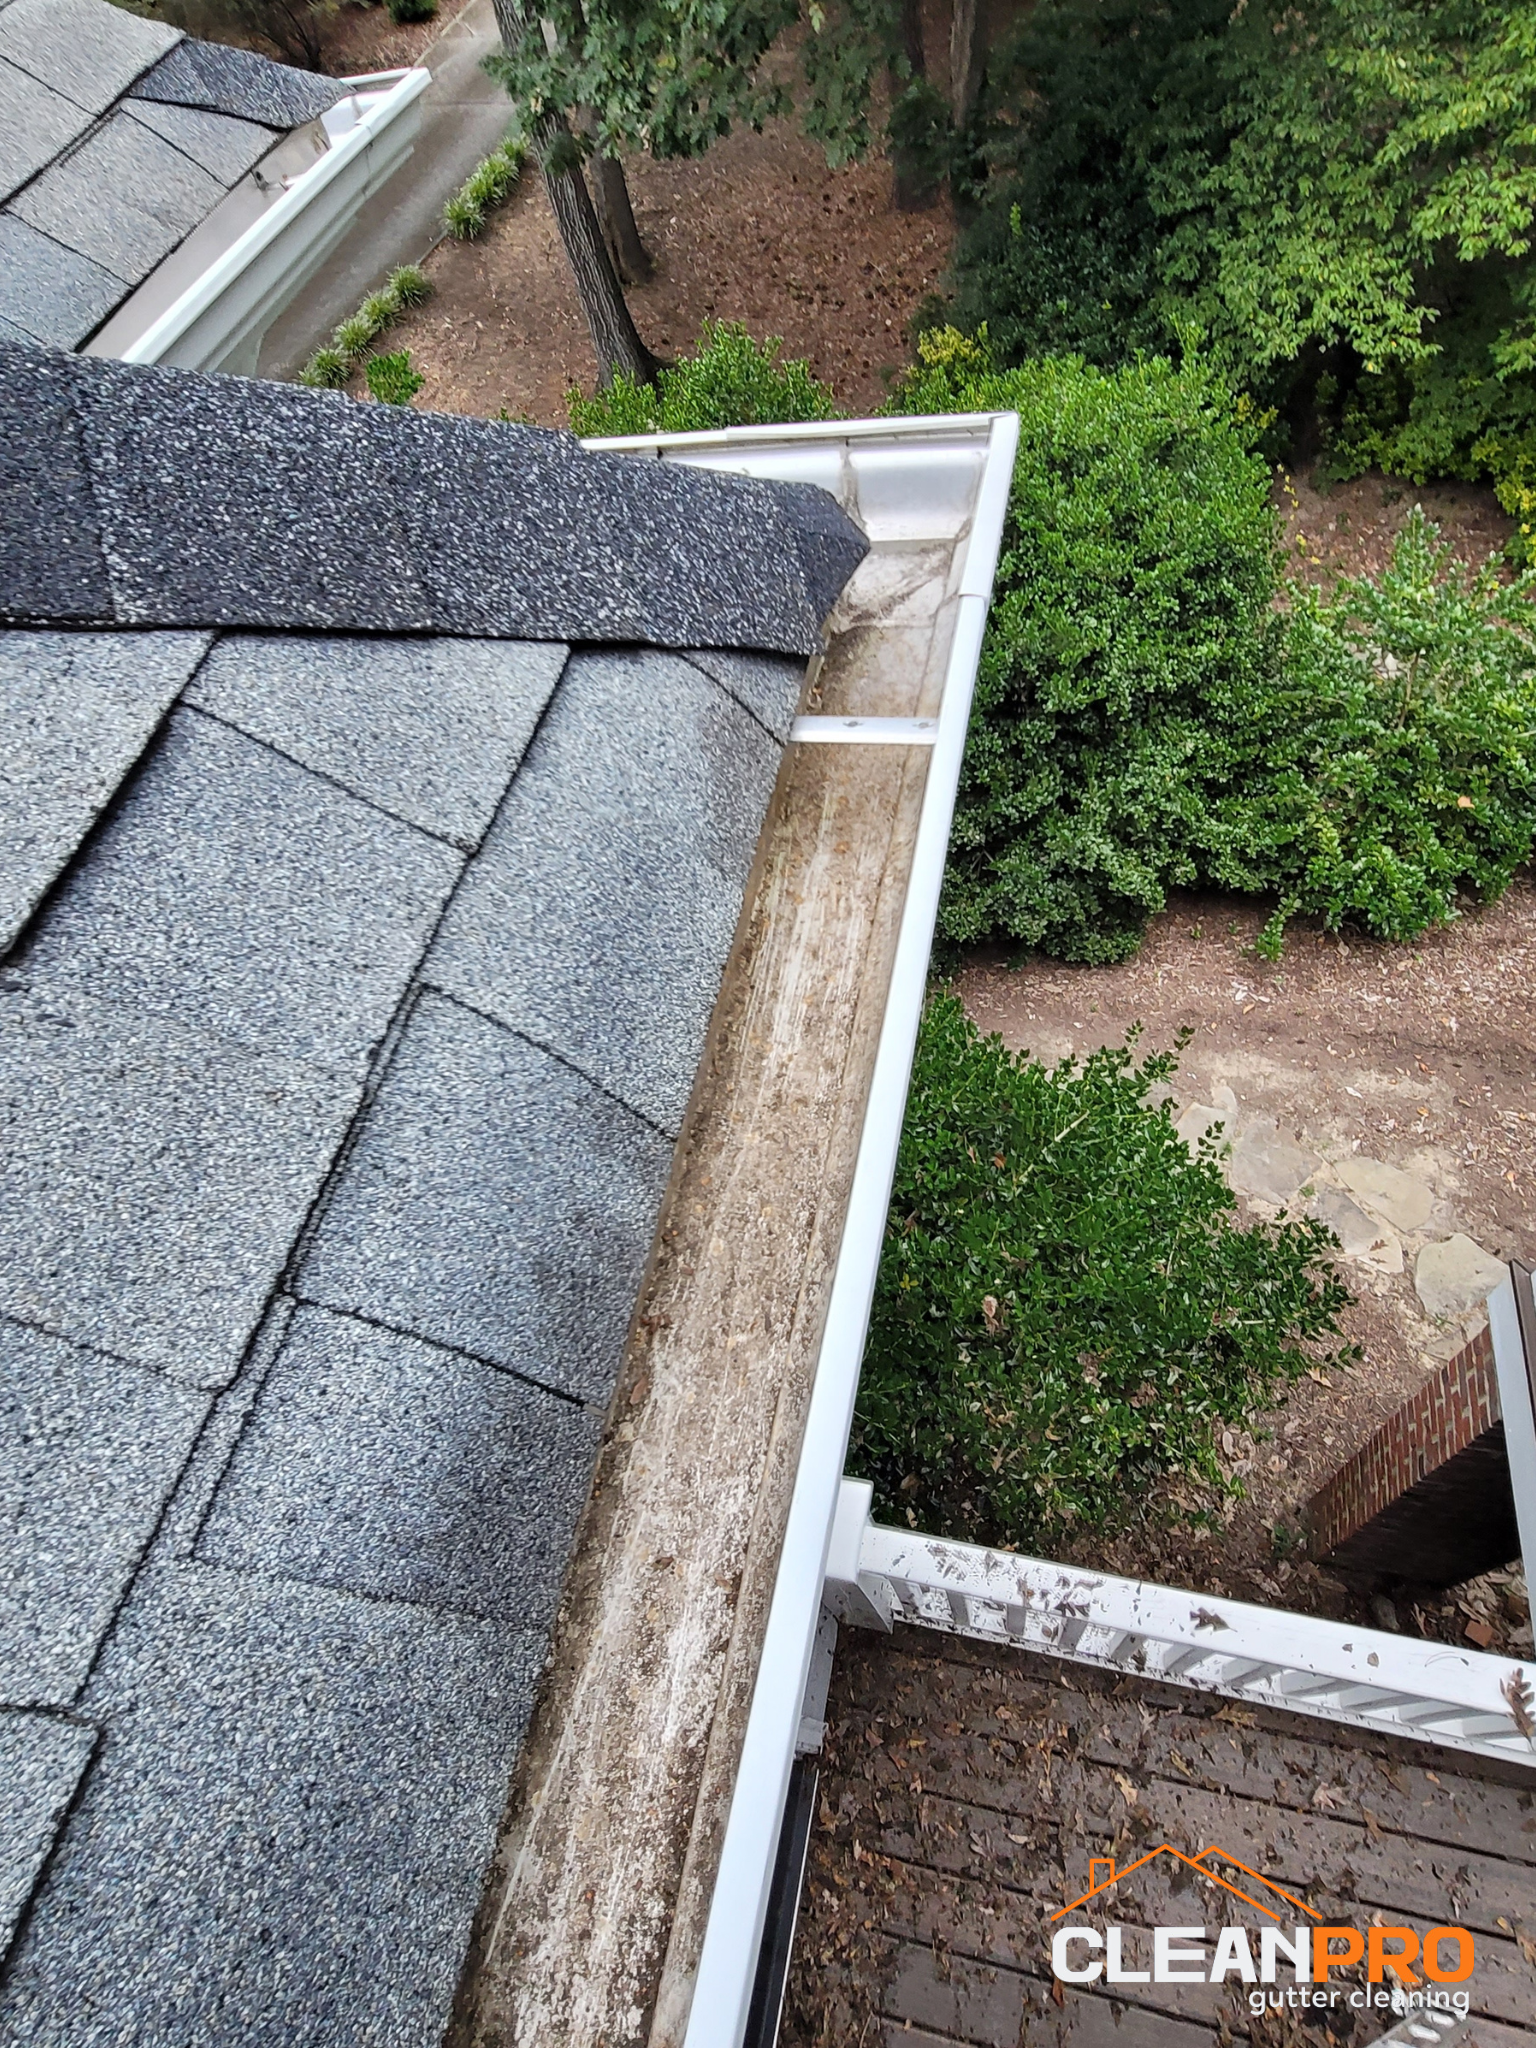 Quality Gutter Cleaning in Colorado Springs CO